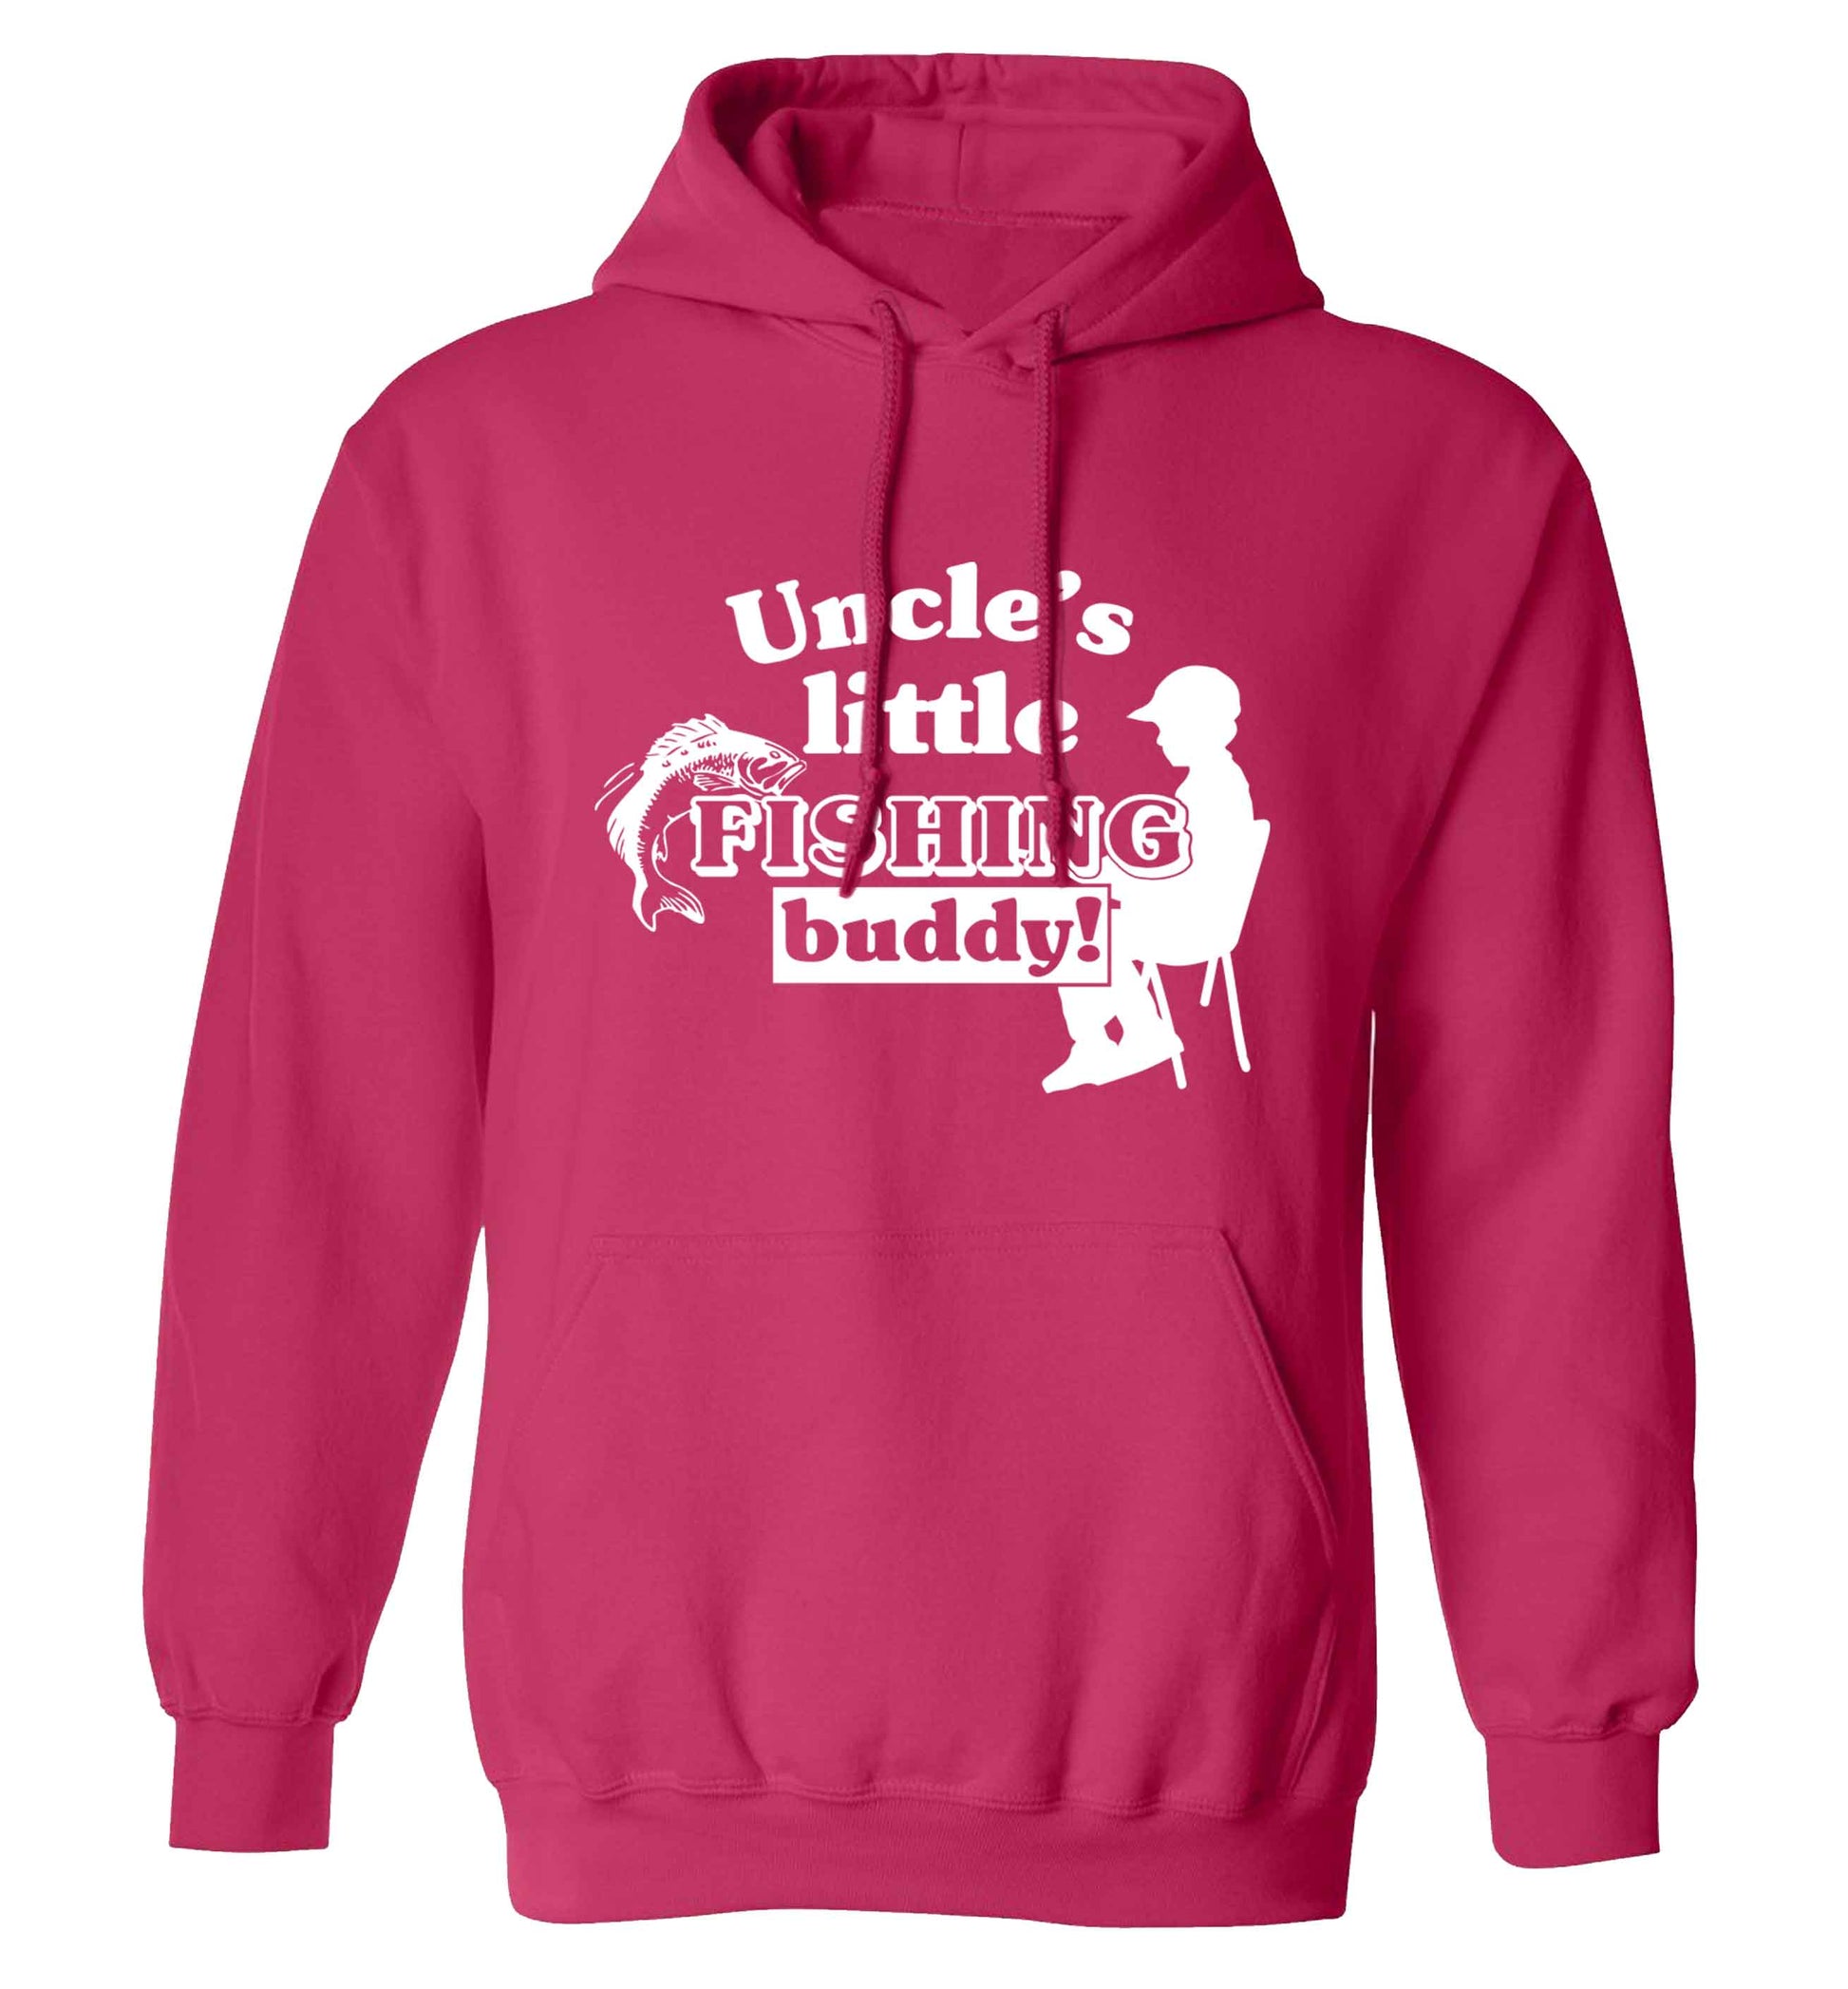 Uncle's little fishing buddy adults unisex pink hoodie 2XL